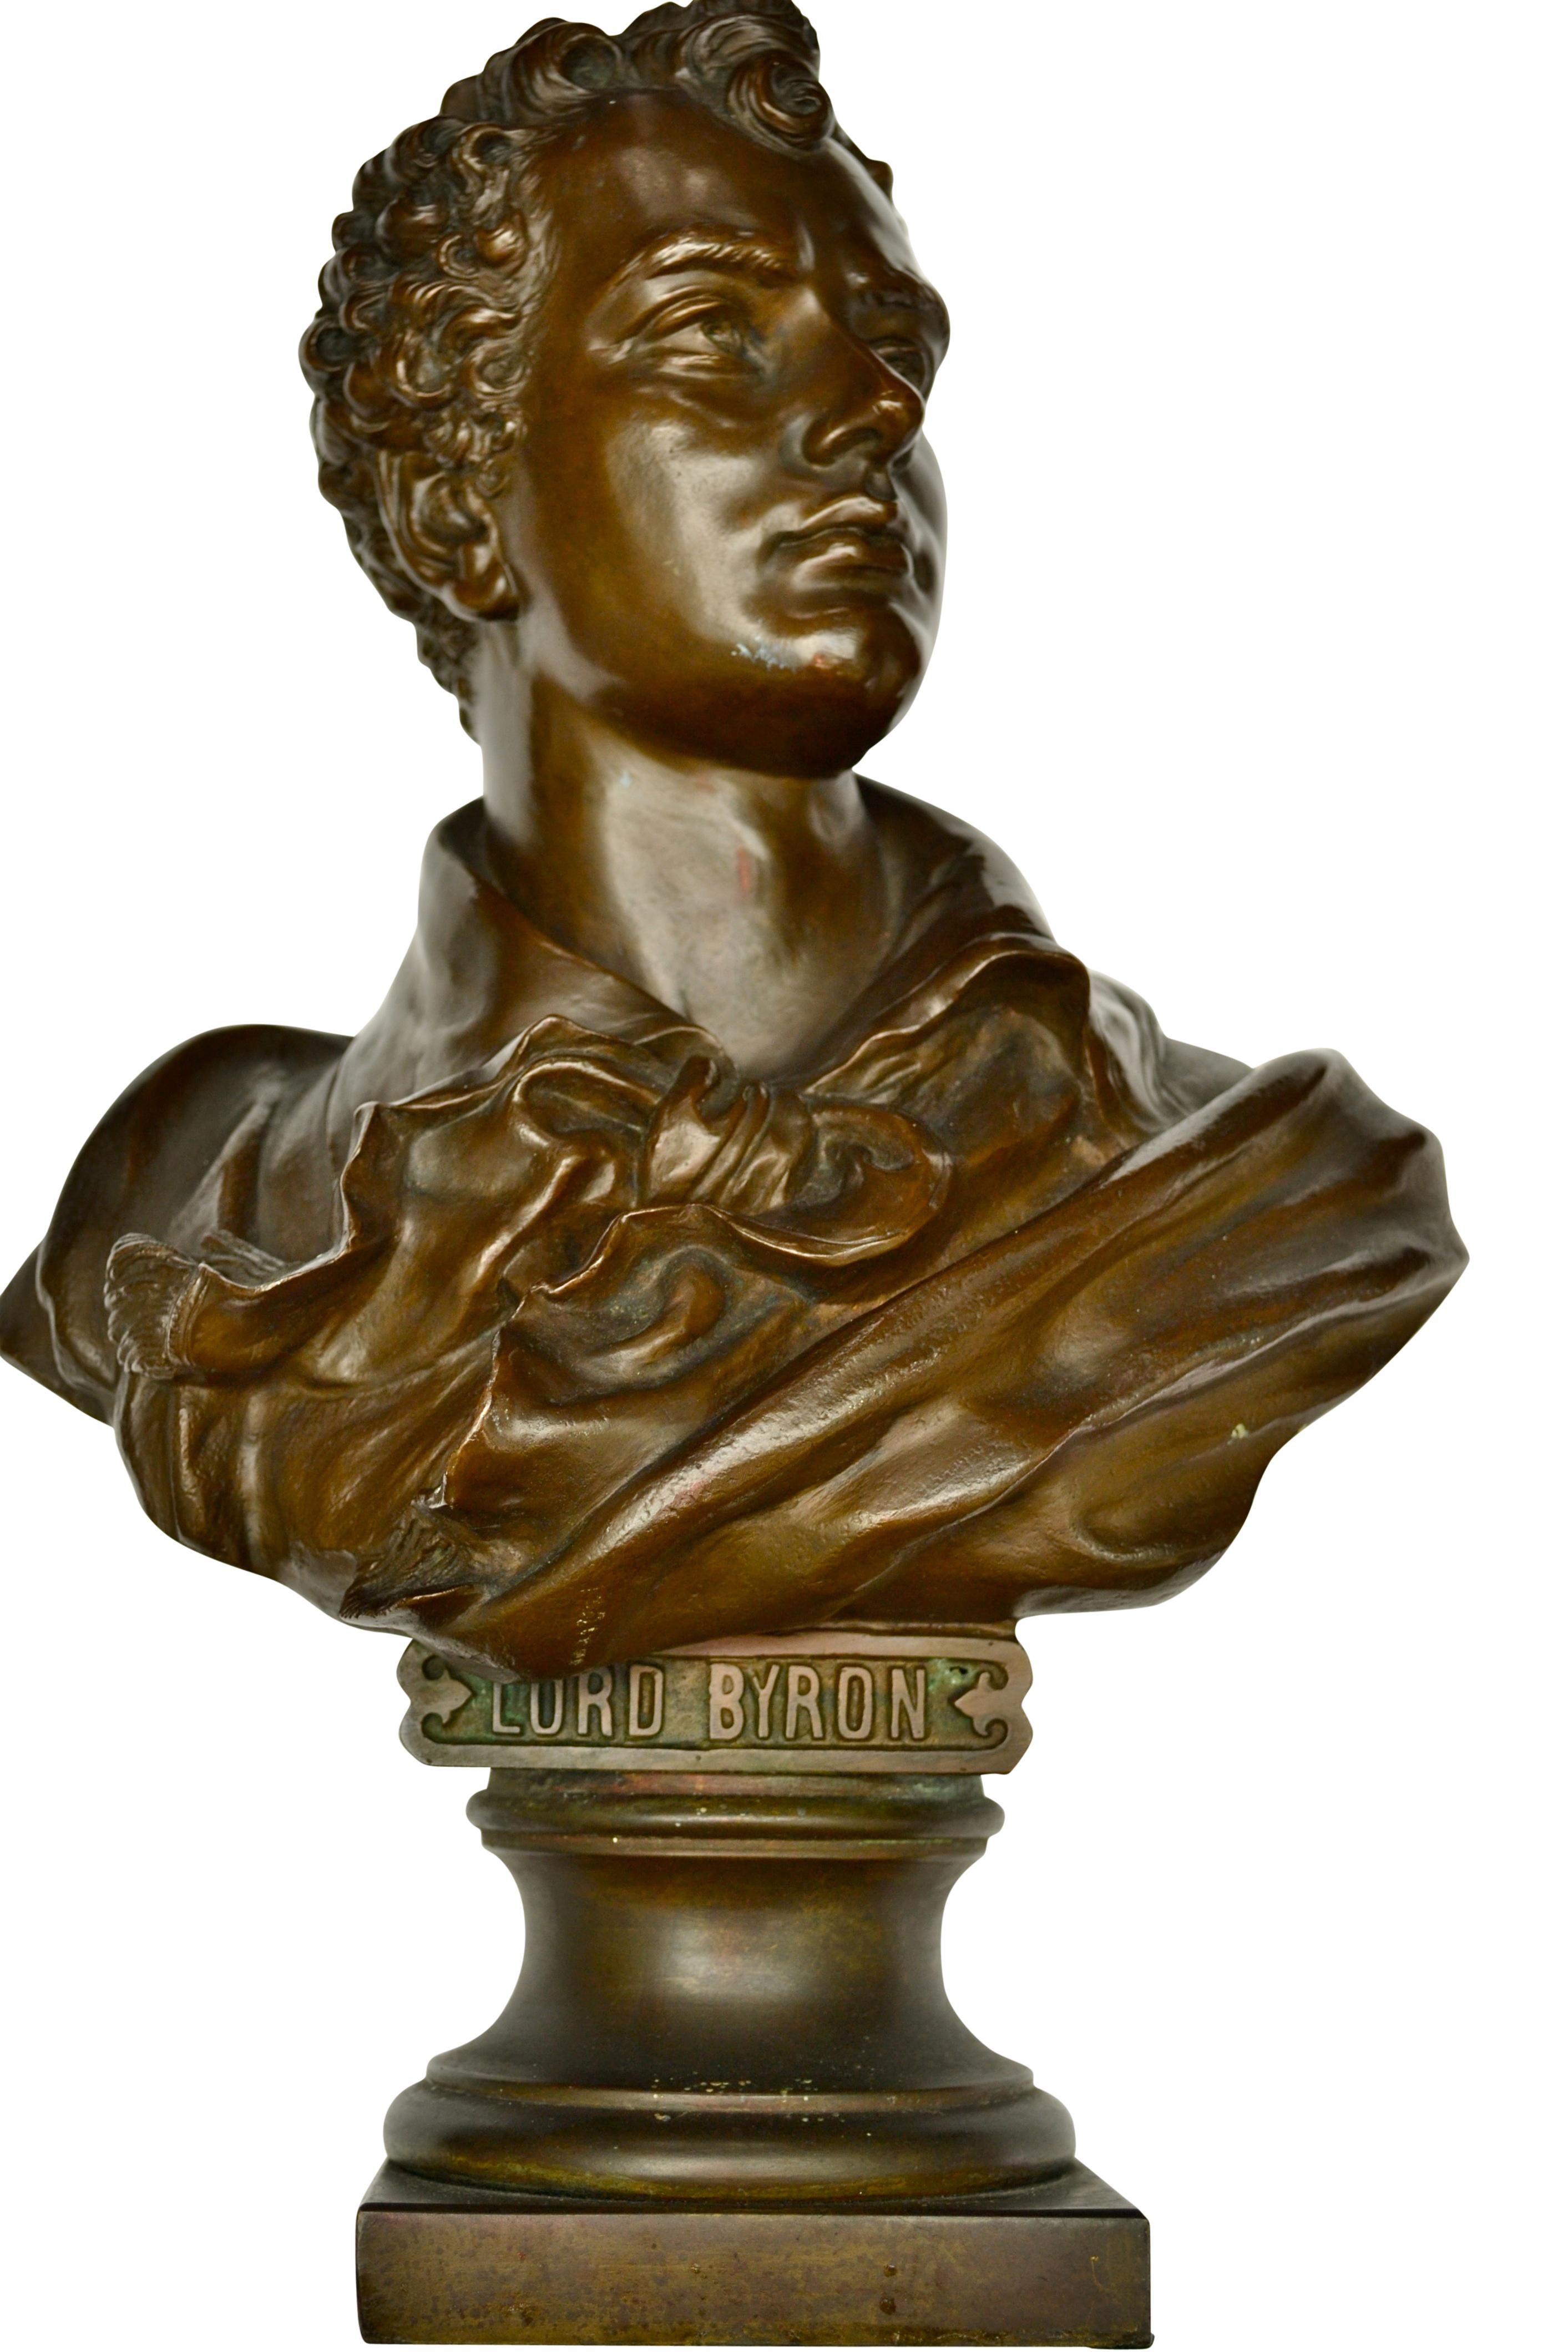 A finely cast late 19th century bronze bust of Lord Byron signed Hans Fromm on the shoulder. No information could be found on the sculptor which suggests that he may have had a very short career and his work is rare. Neither is there a foundry mark